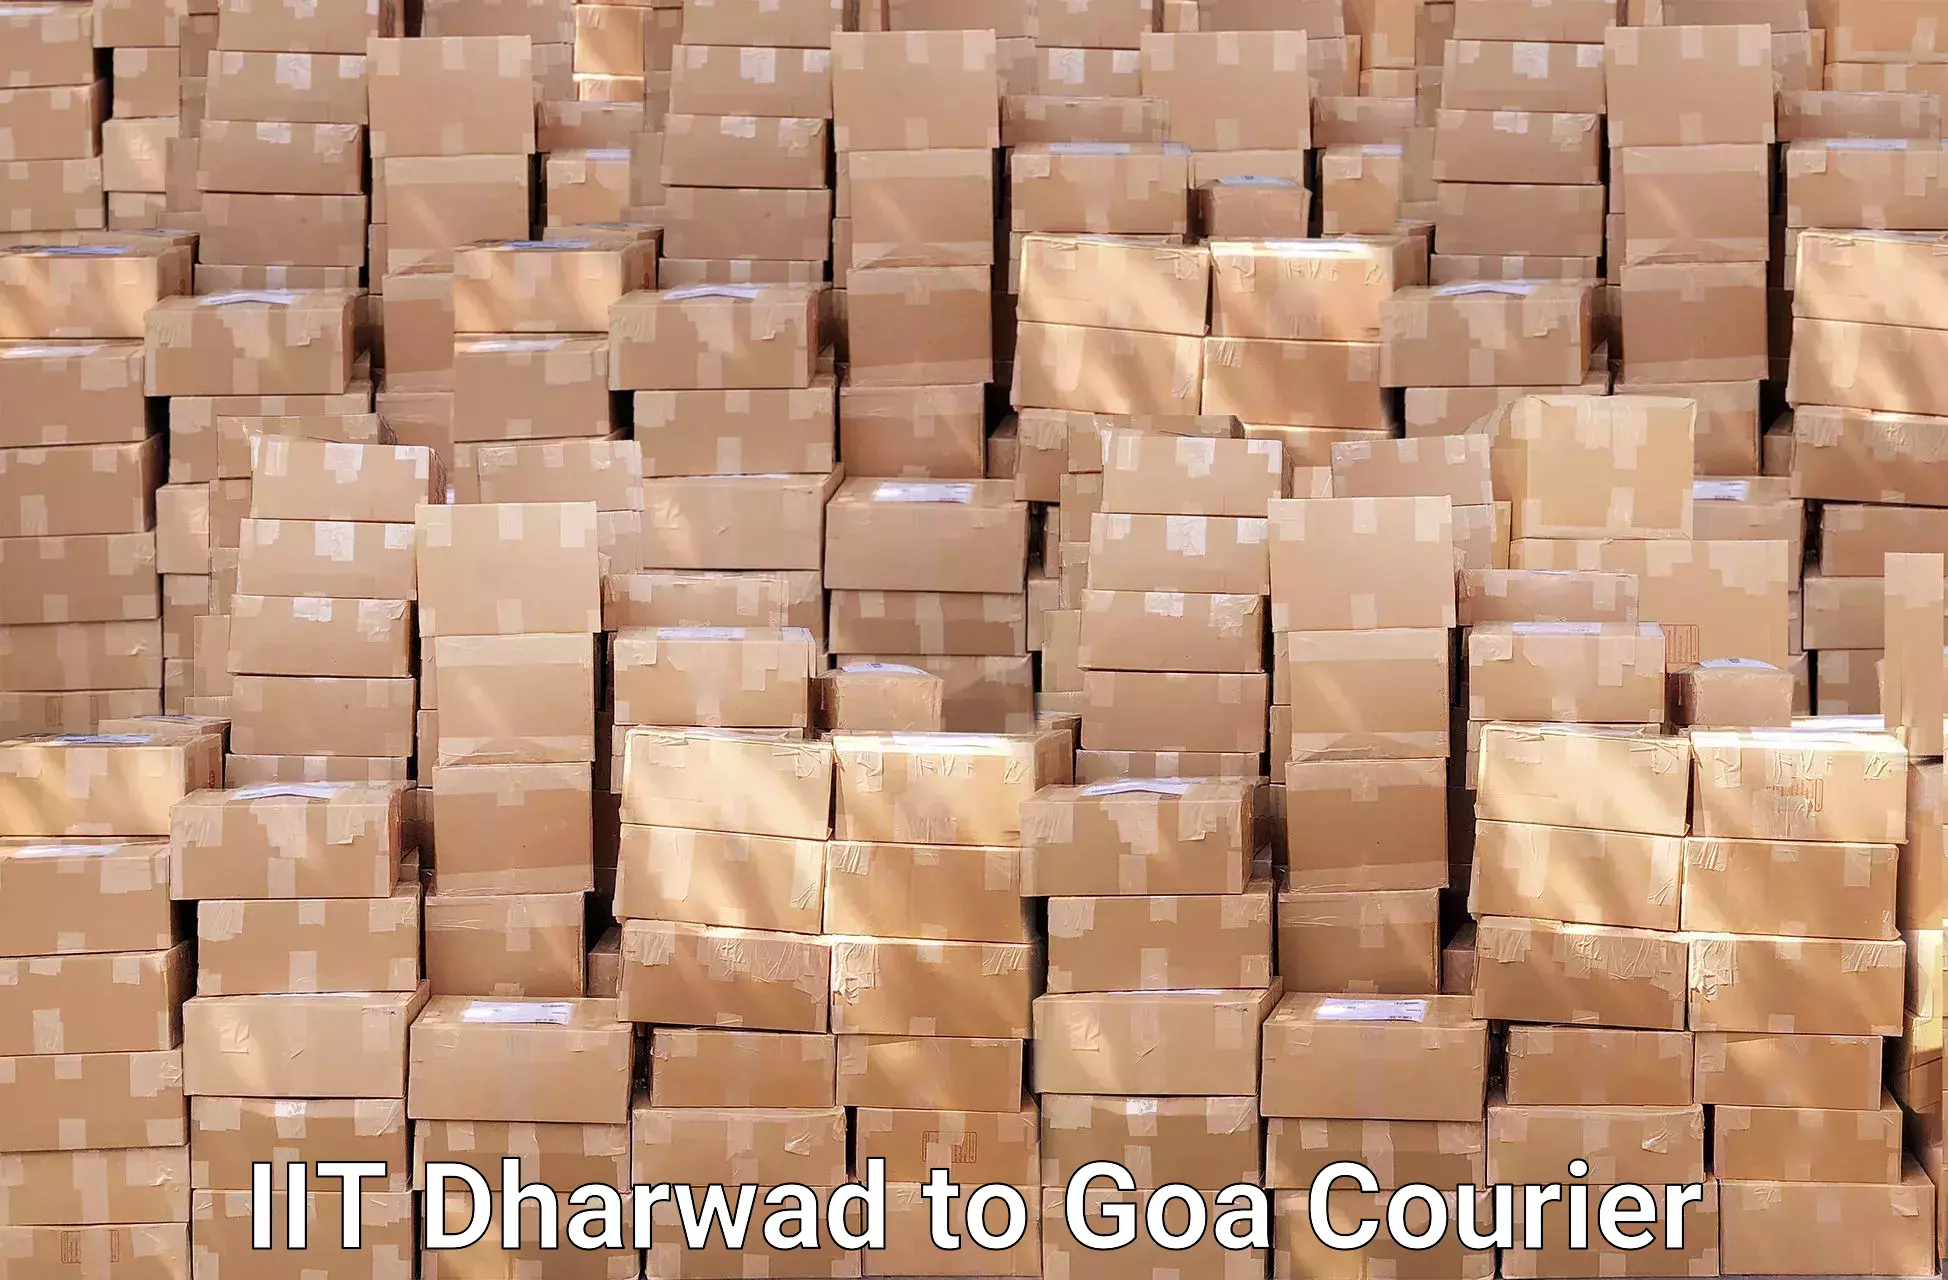 Professional relocation services IIT Dharwad to Goa